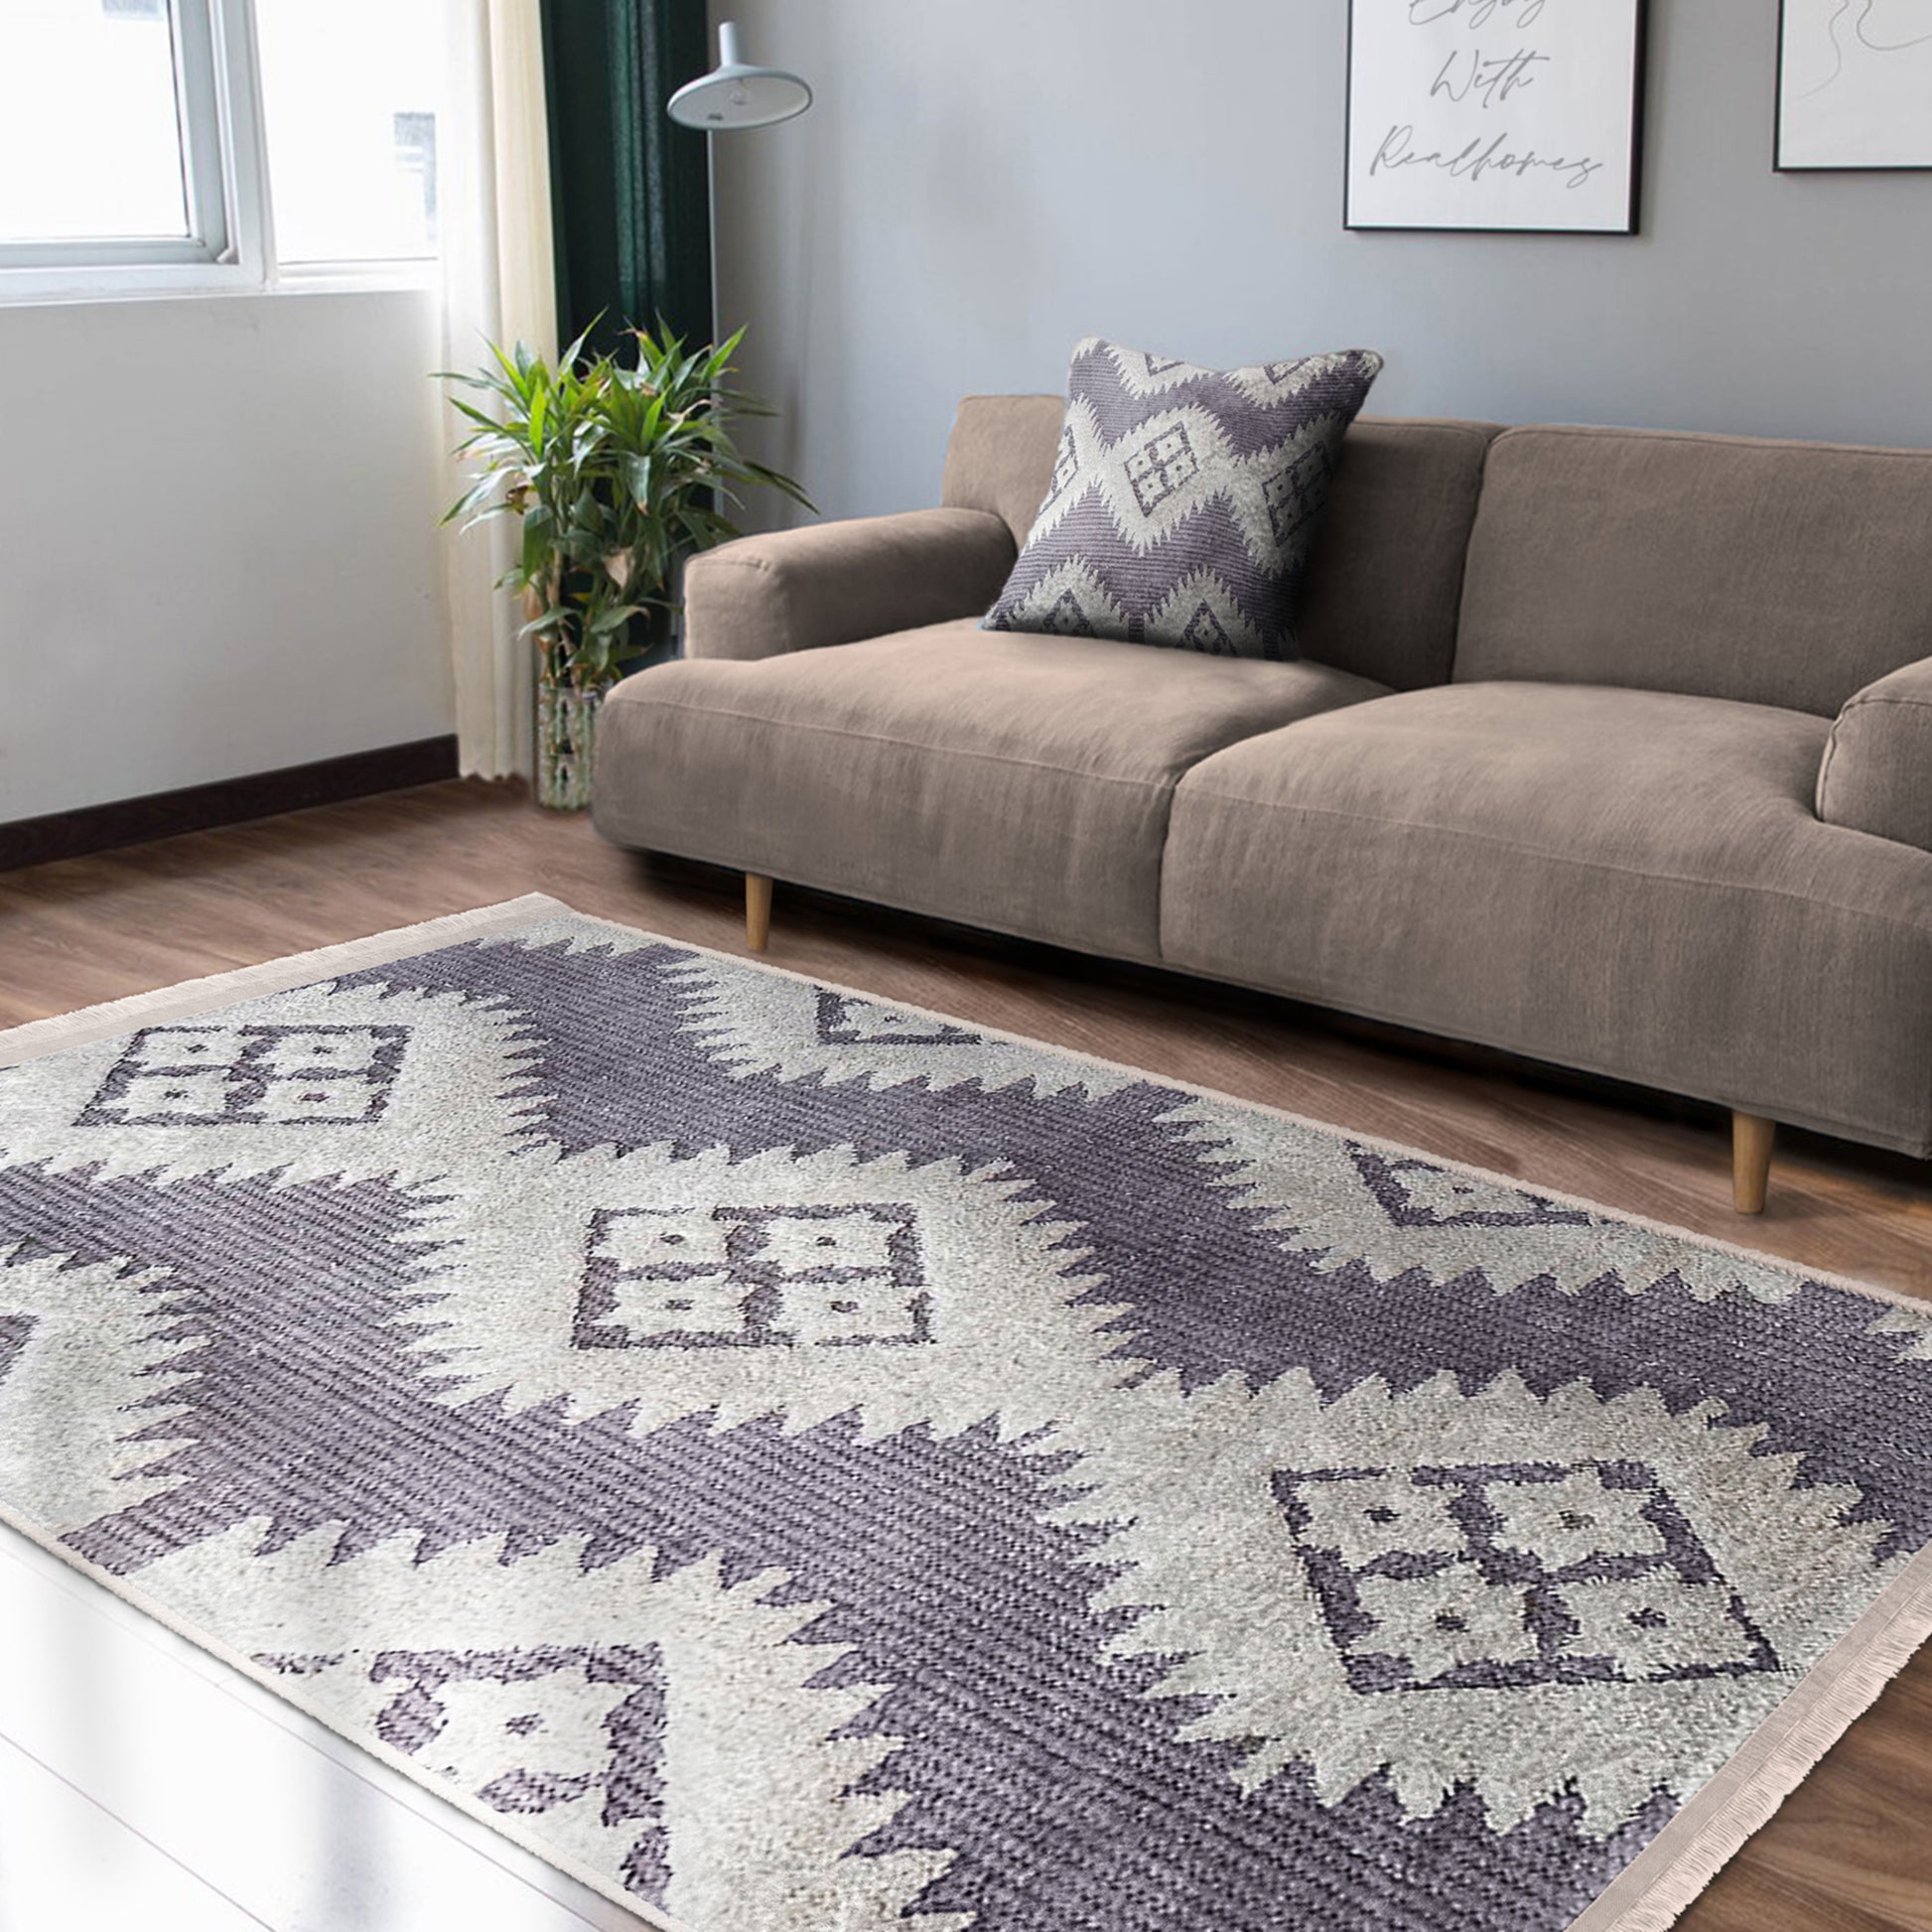 Create Cozy Vibes with Our Washable Floor Rug